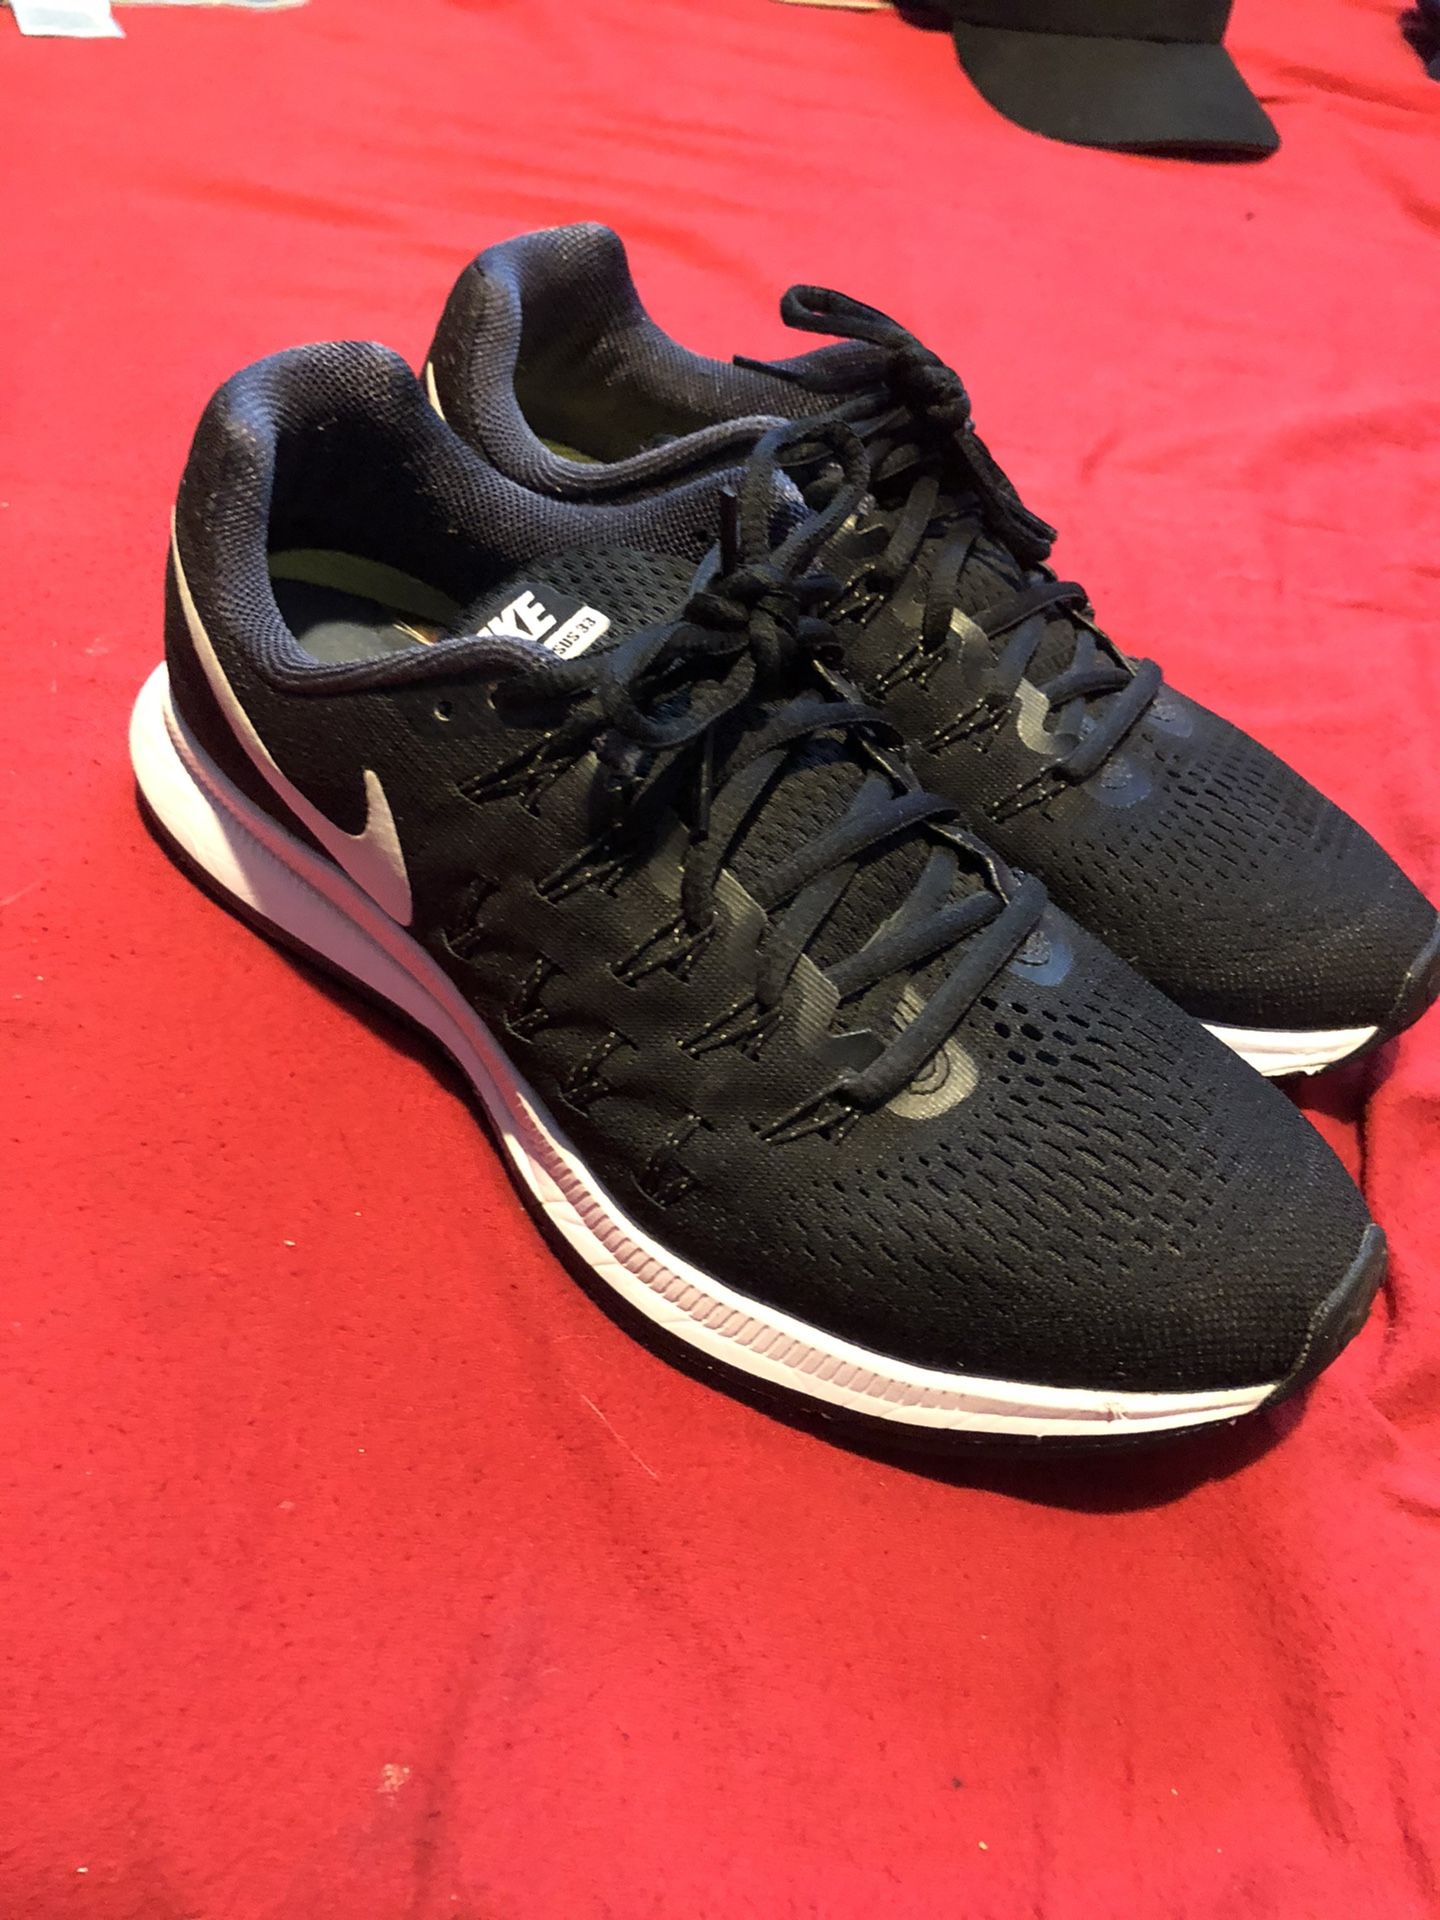 Nike running shoes size 9.5